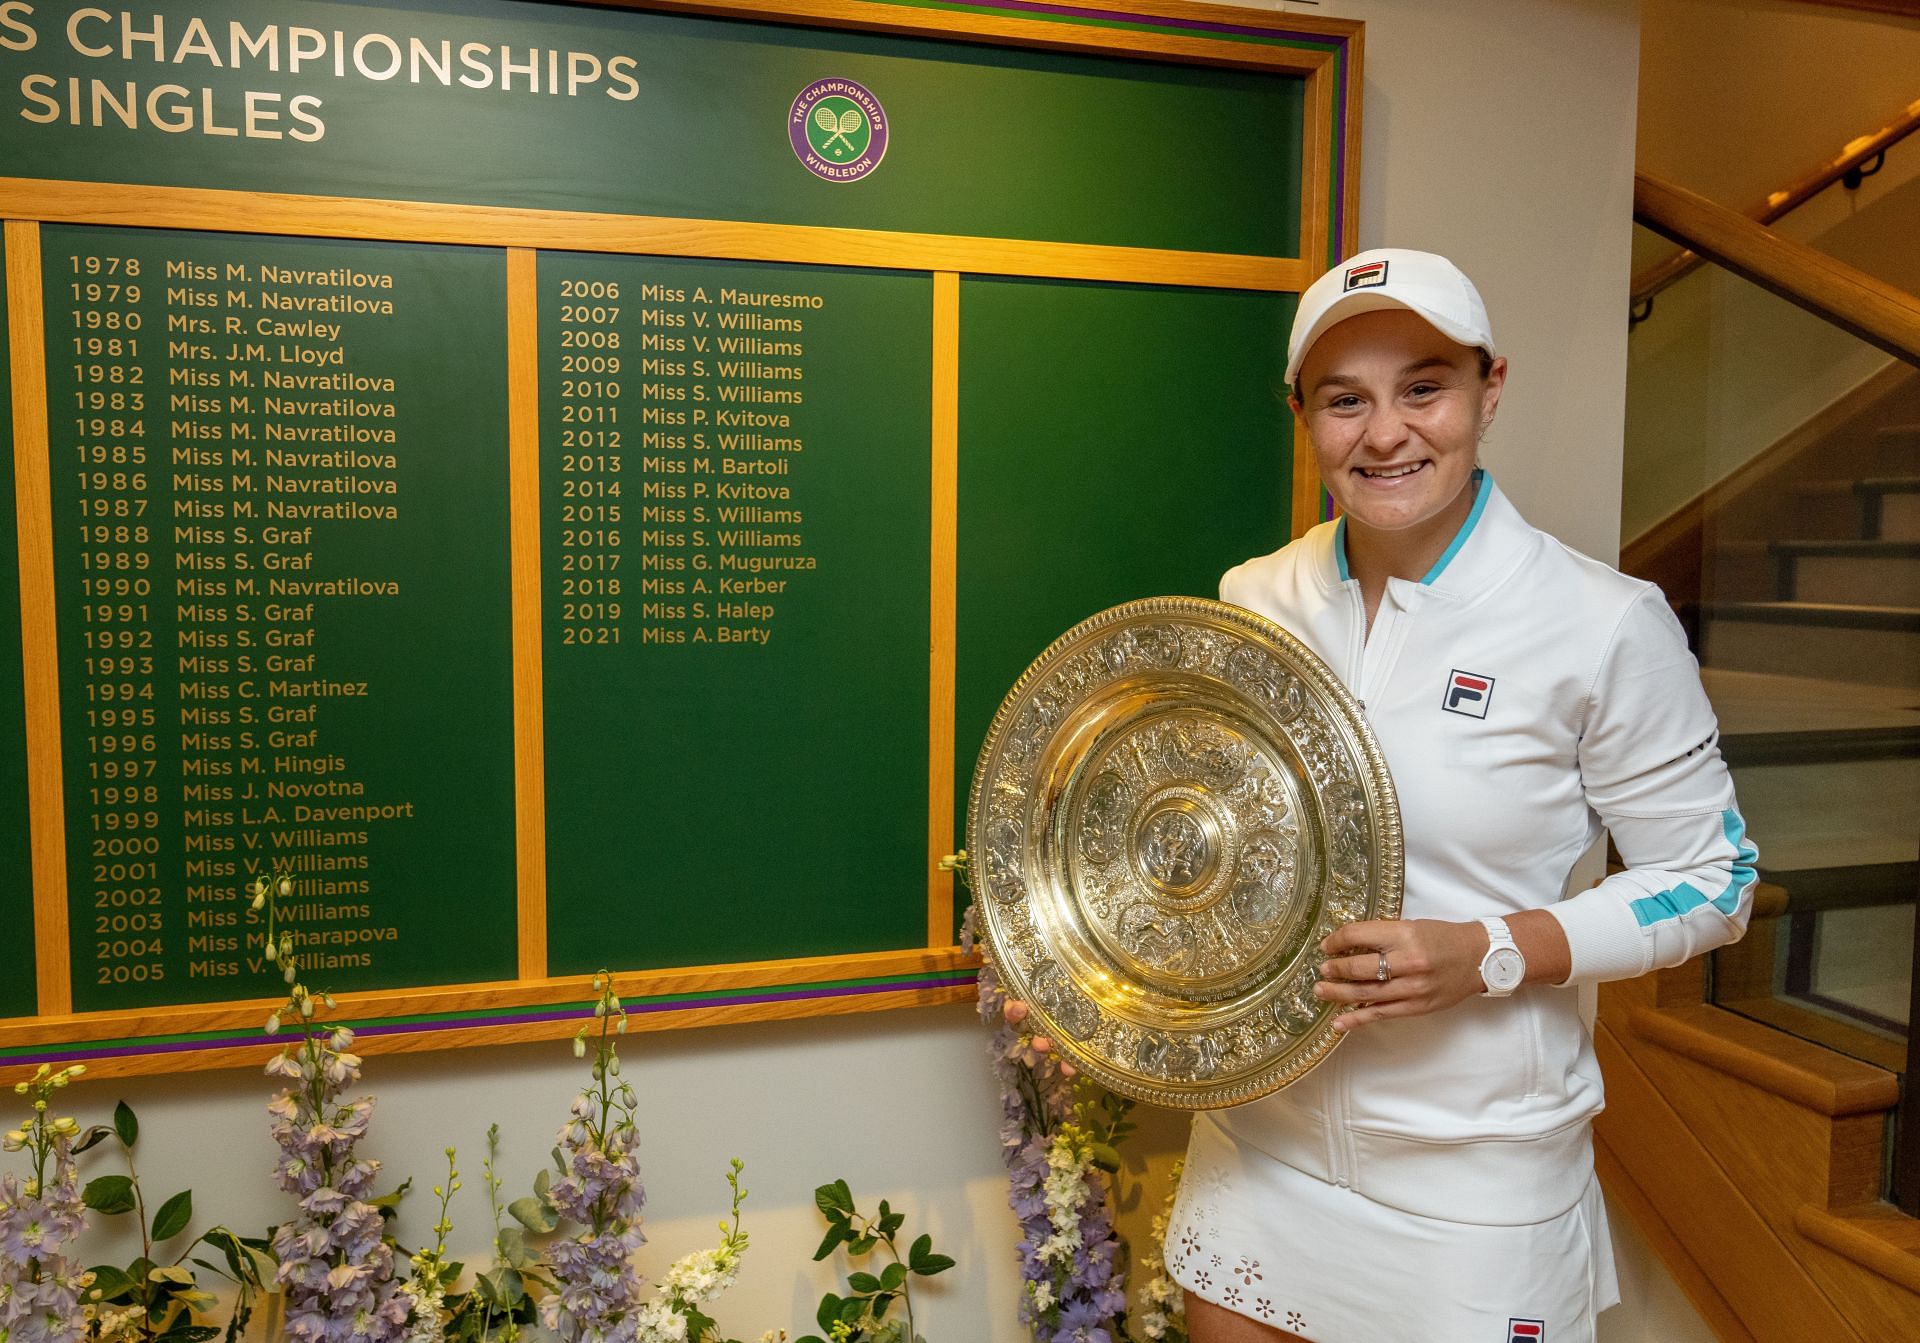 Ashleigh Barty with the Venus Rosewater Dish after winning Wimbledon 2021